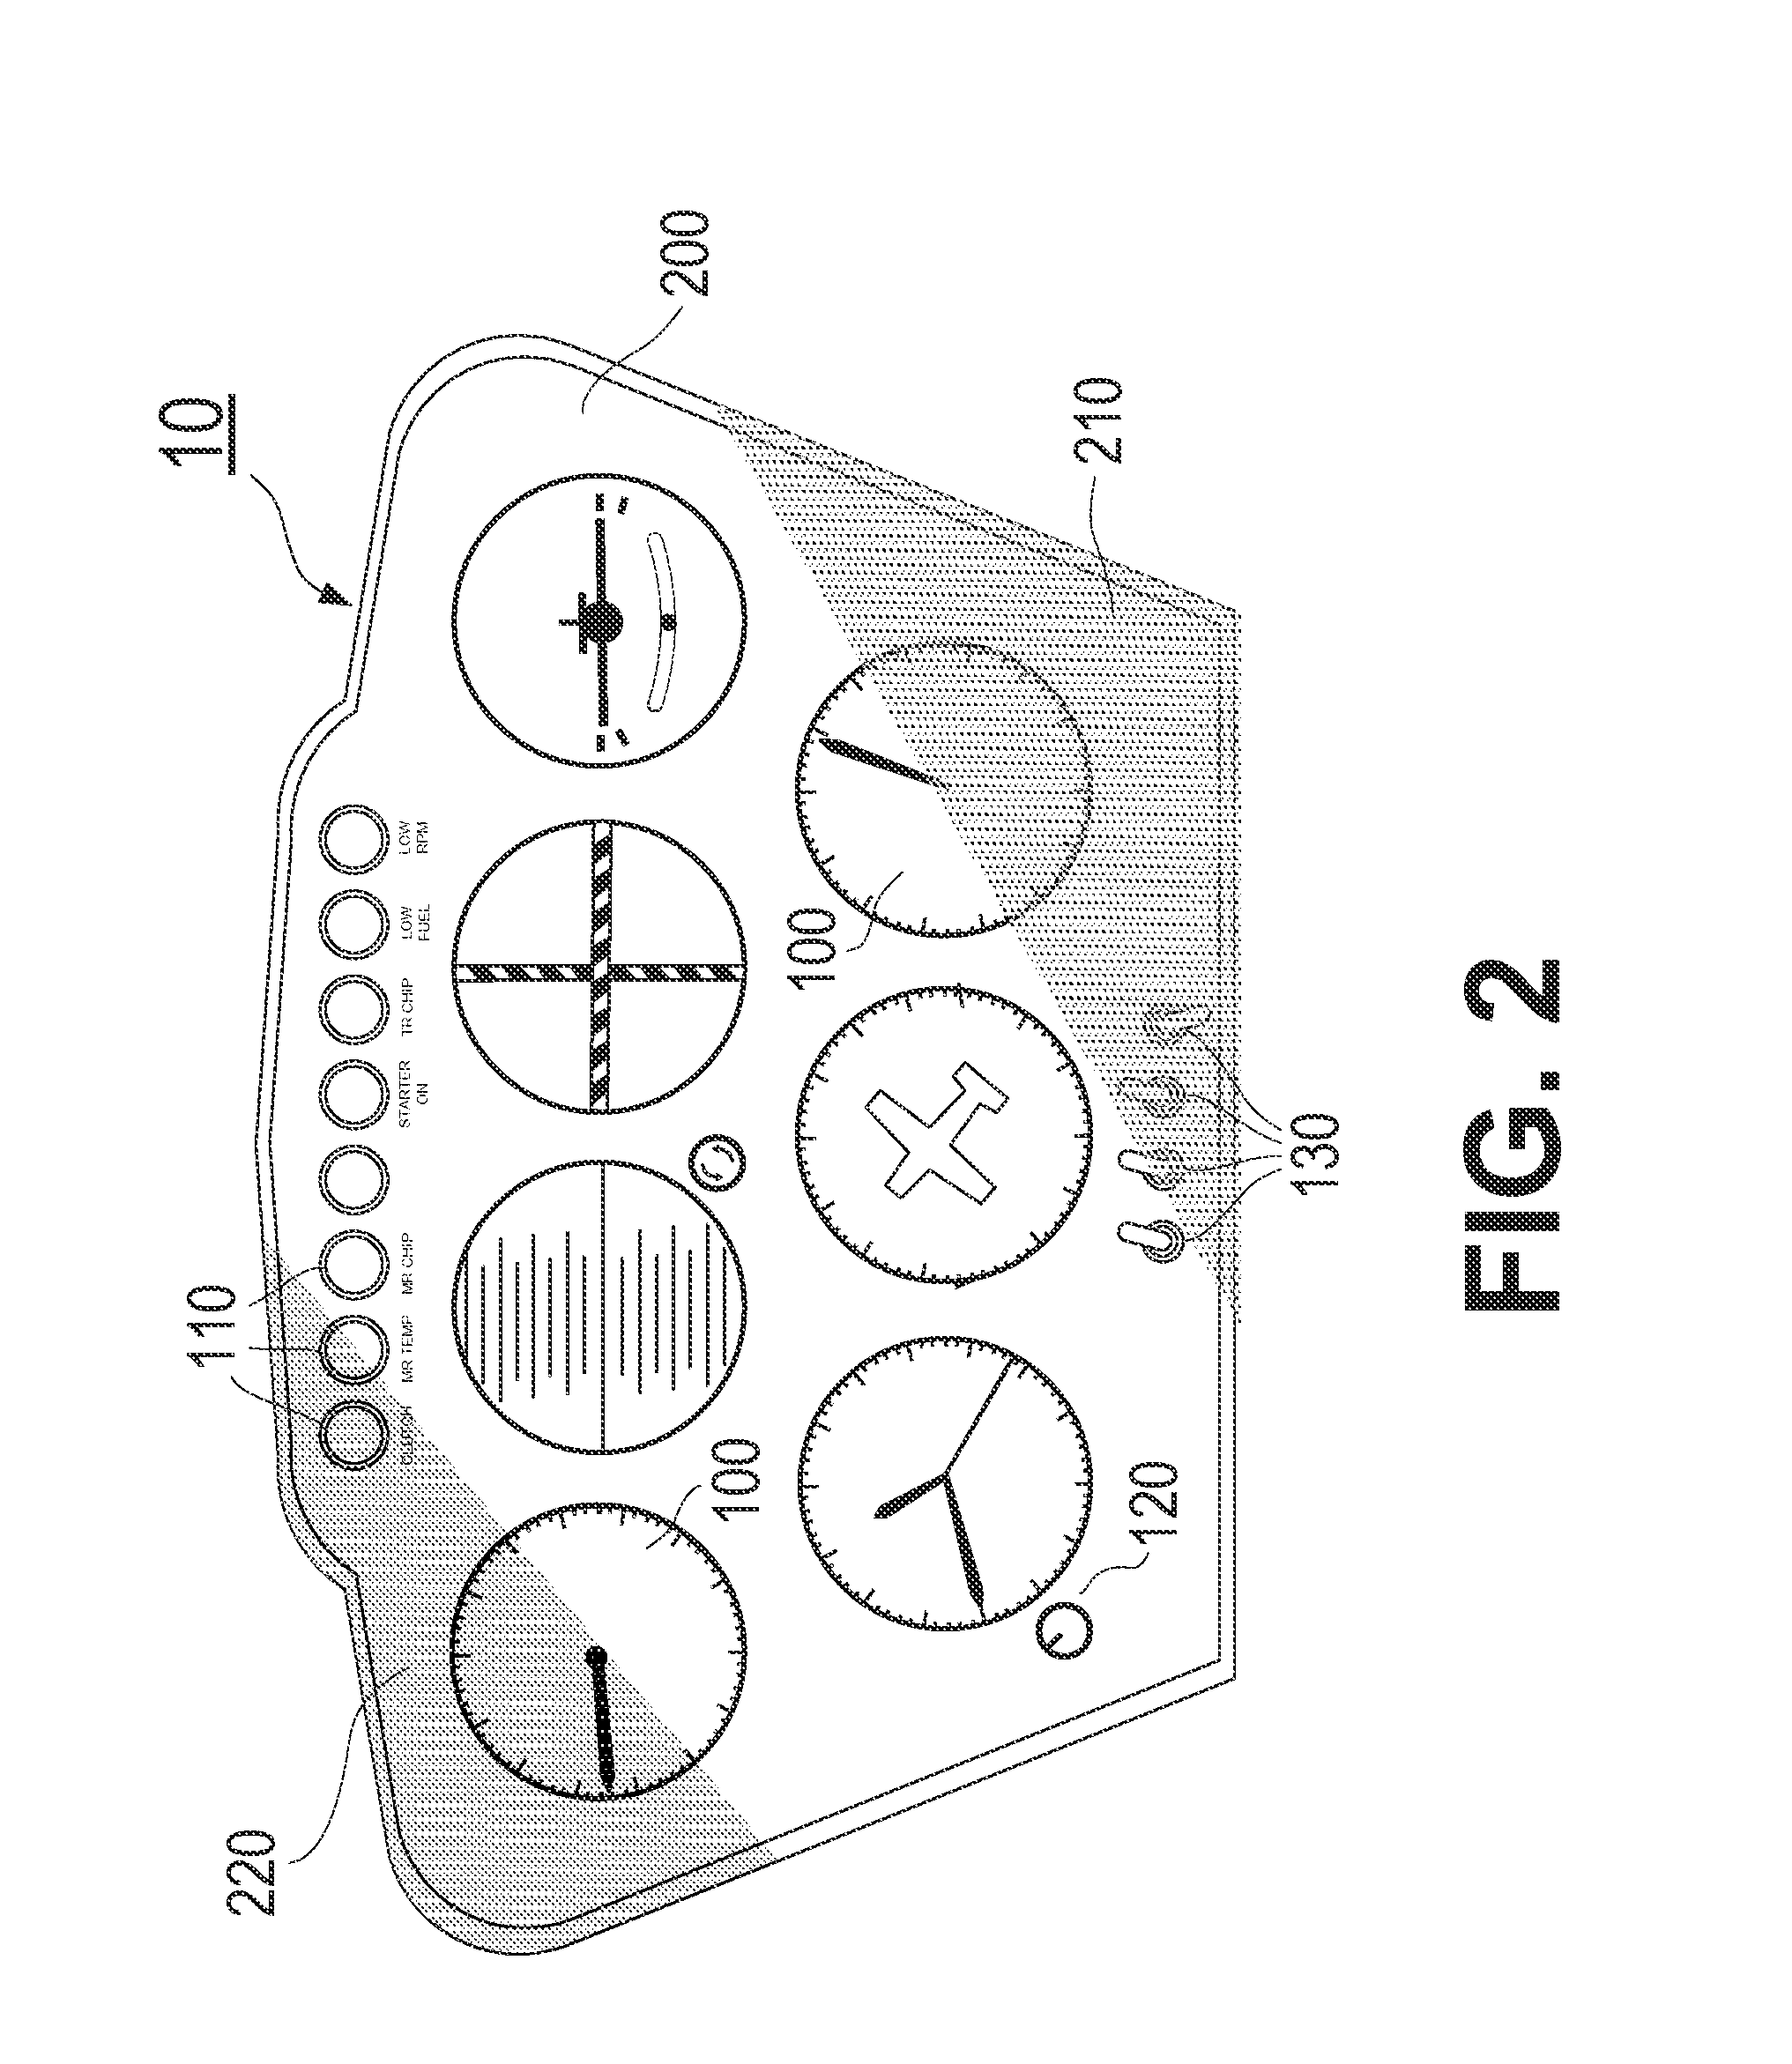 Optical image monitoring system and method for unmanned aerial vehicles